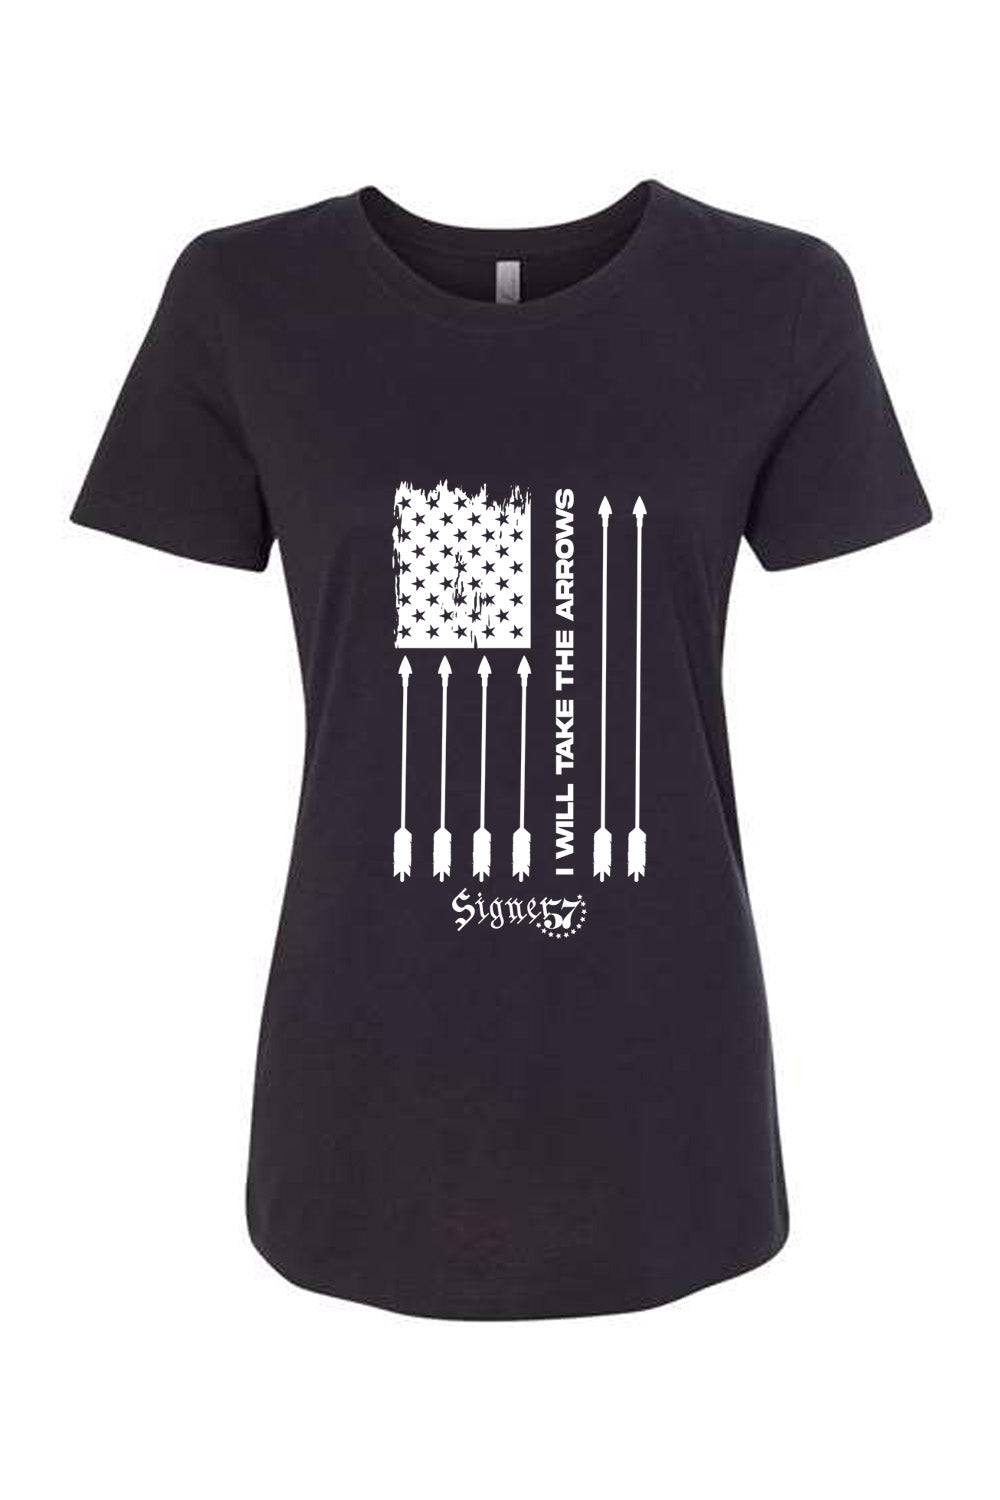 Women's T-Shirt - I Will Take the Arrows